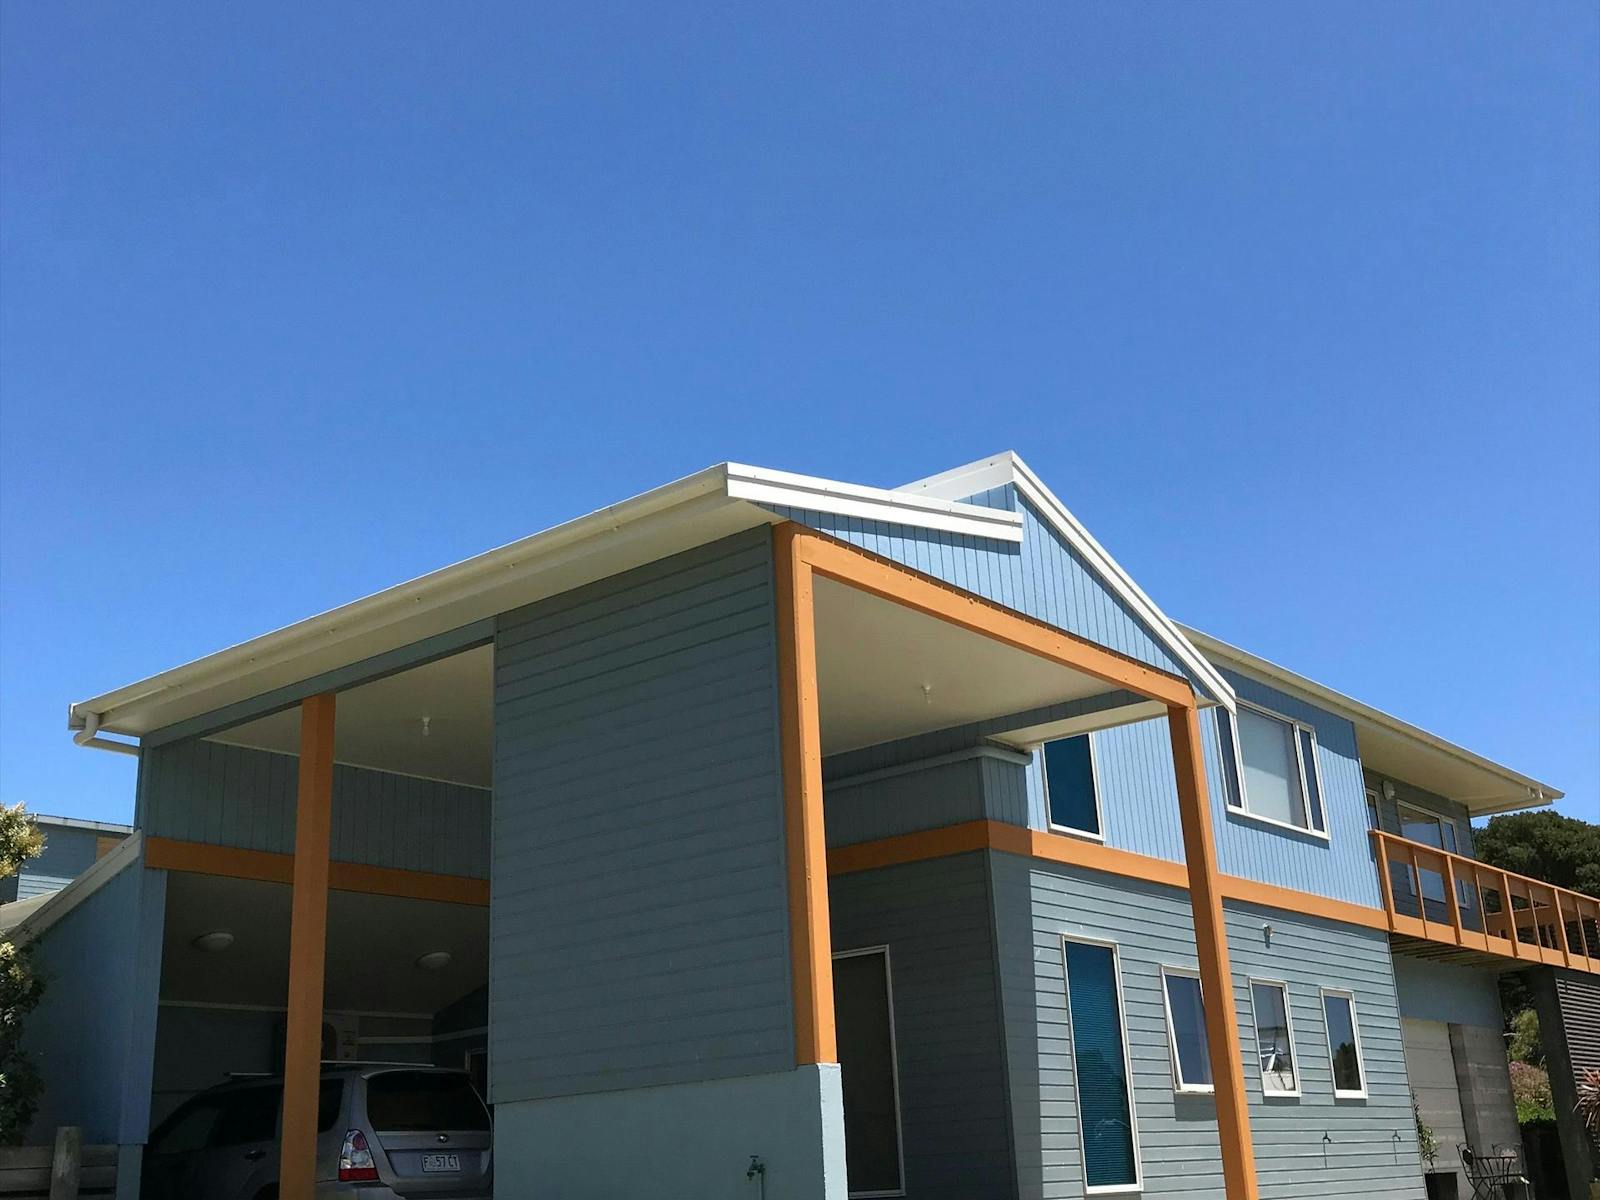 Clear blue sky in background with blue large beachhouse with orange accents